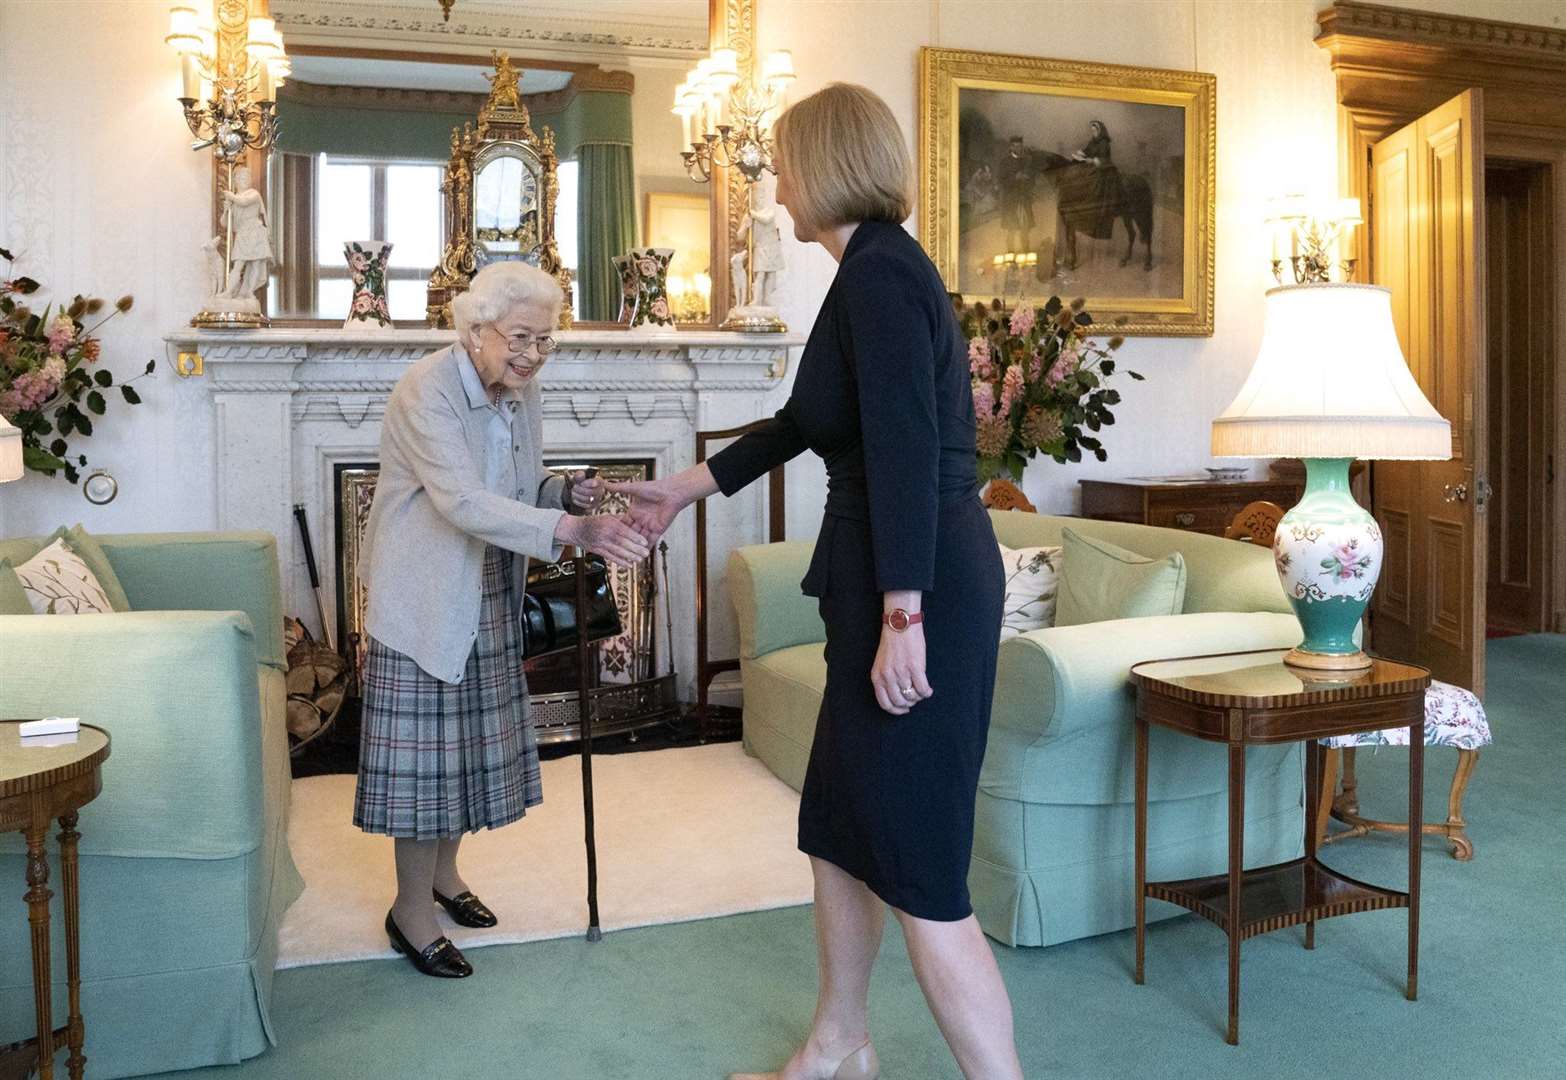 HM the Queen at the meeting to appoint Liz Truss as Prime Minister.